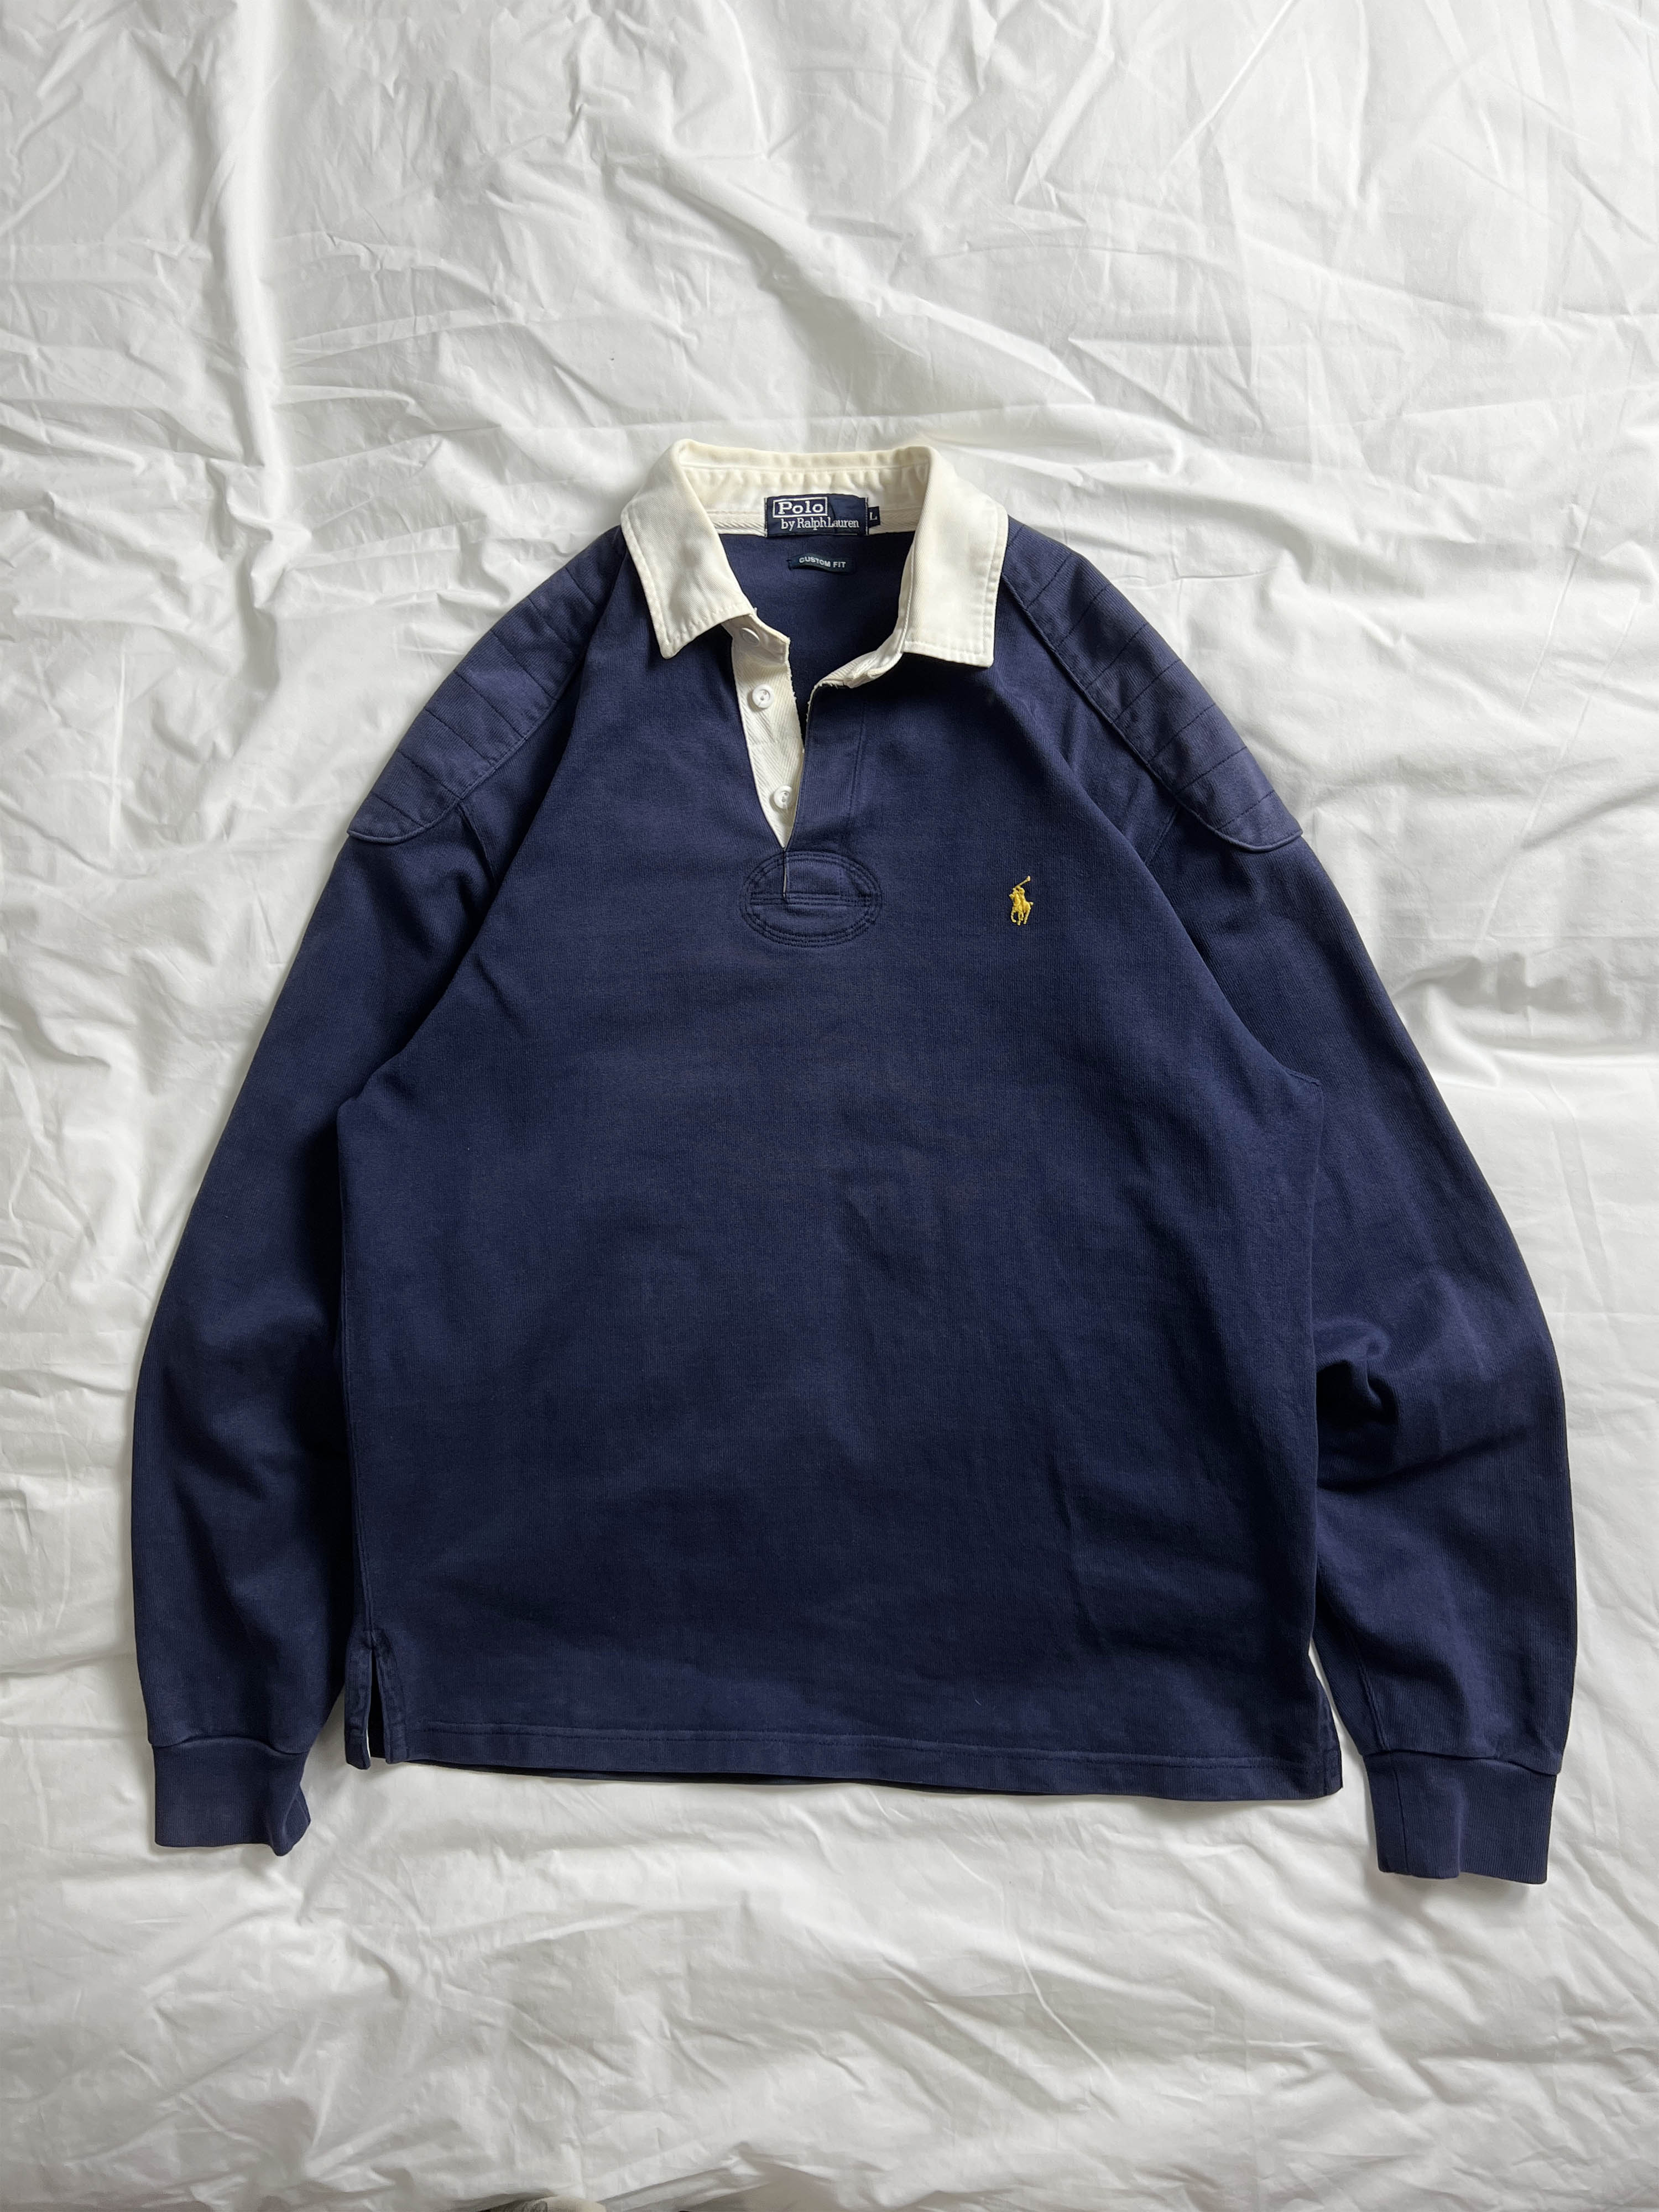 Polo by Ralph Lauren rugby shirts